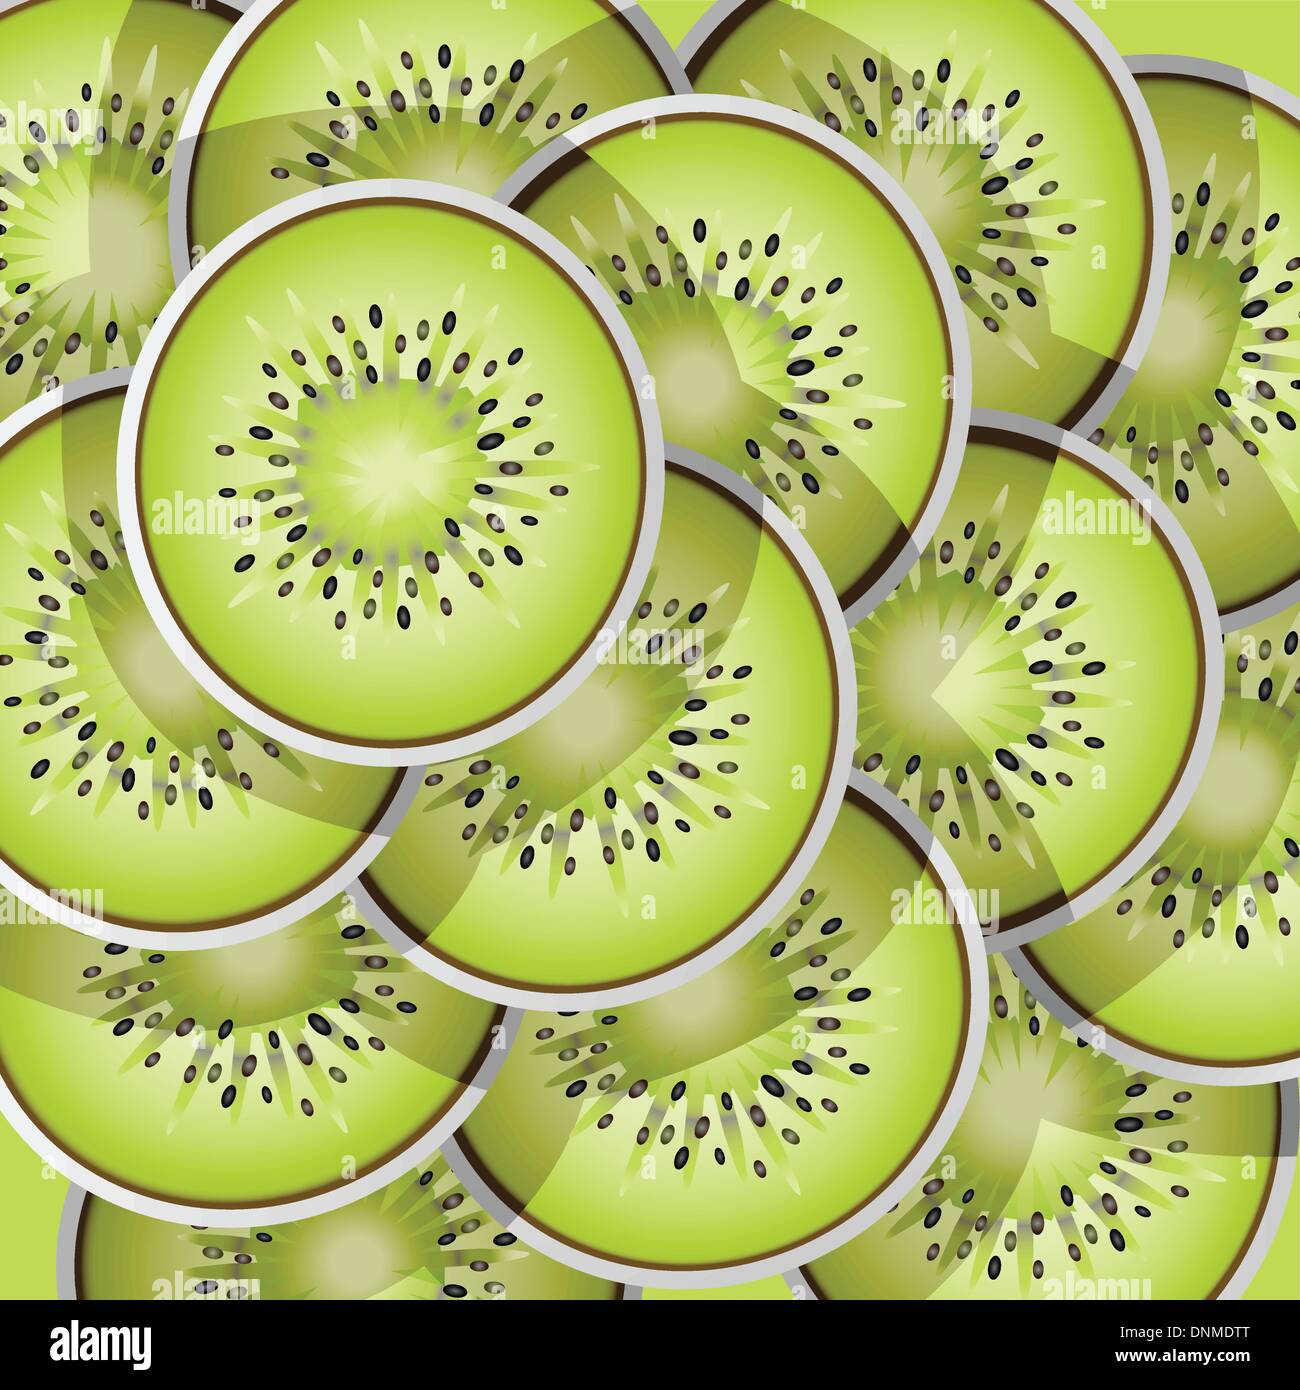 A vector illustration of kiwi slices pattern Stock Vector